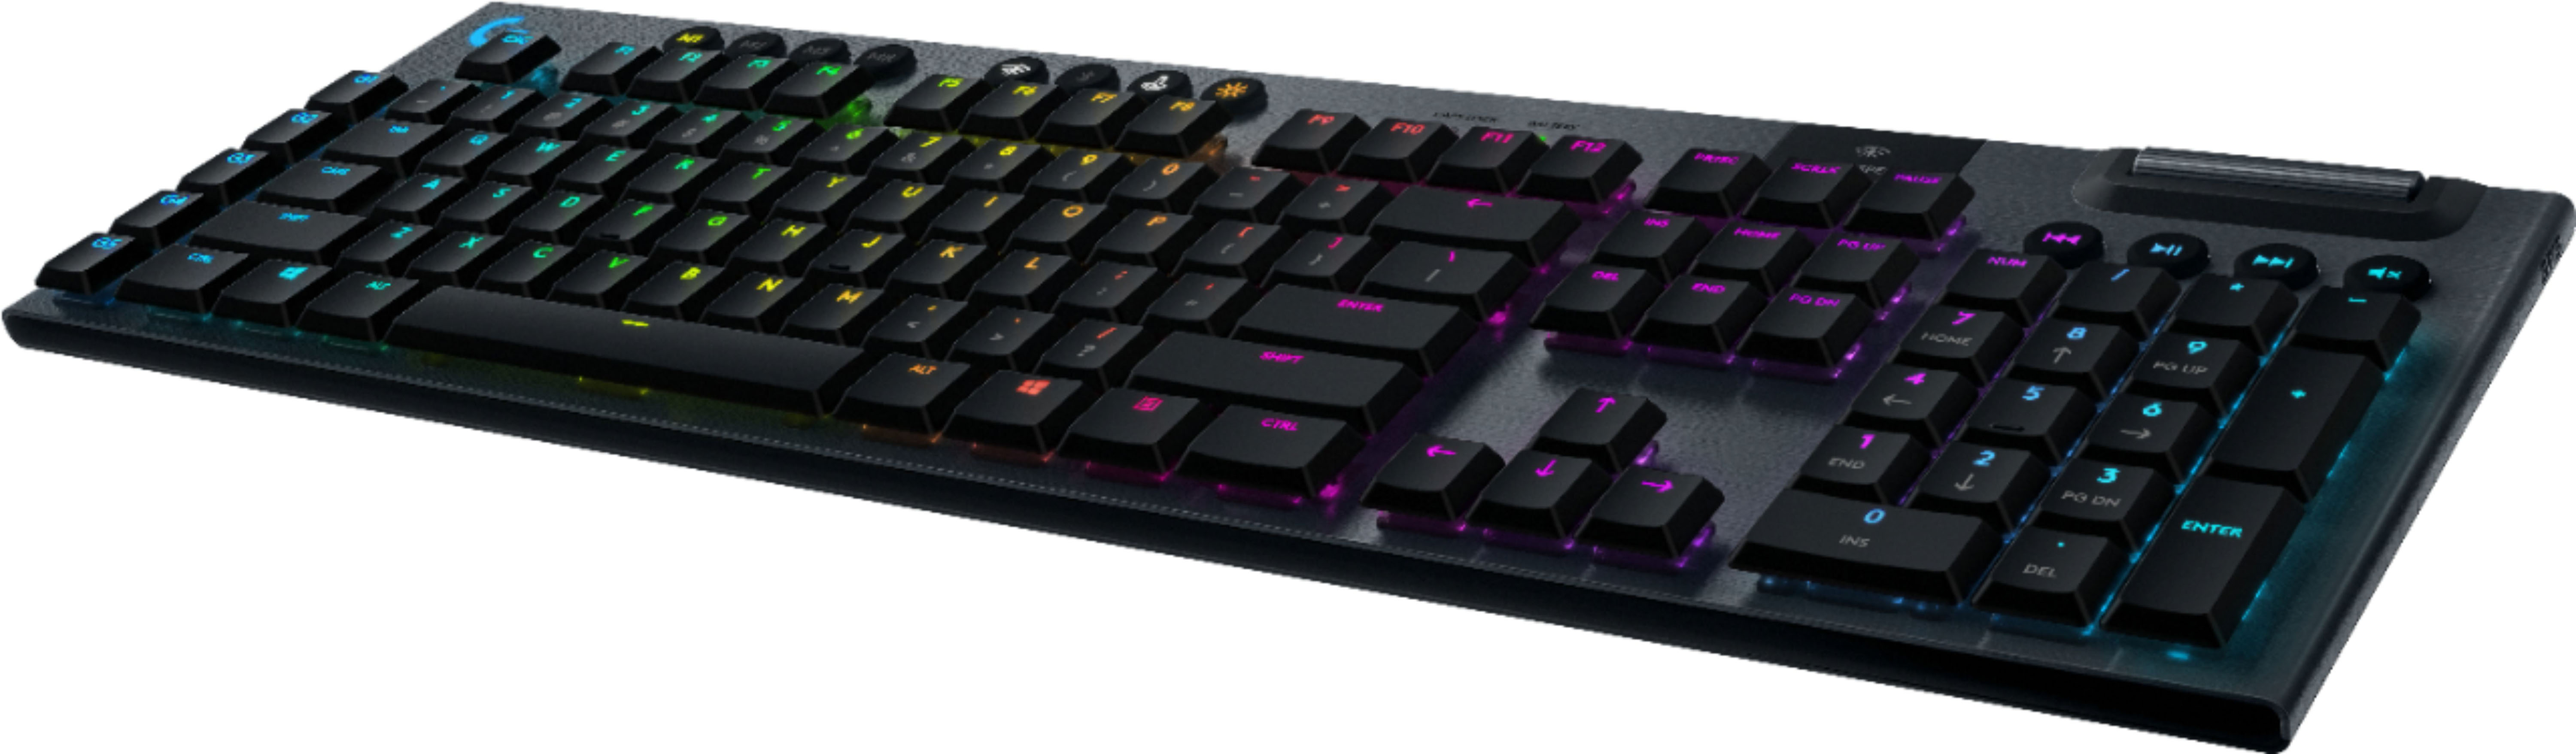 Left View: Logitech - G815 LIGHTSYNC Full-size Wired Mechanical GL Linear Switch Gaming Keyboard with RGB Backlighting - Carbon